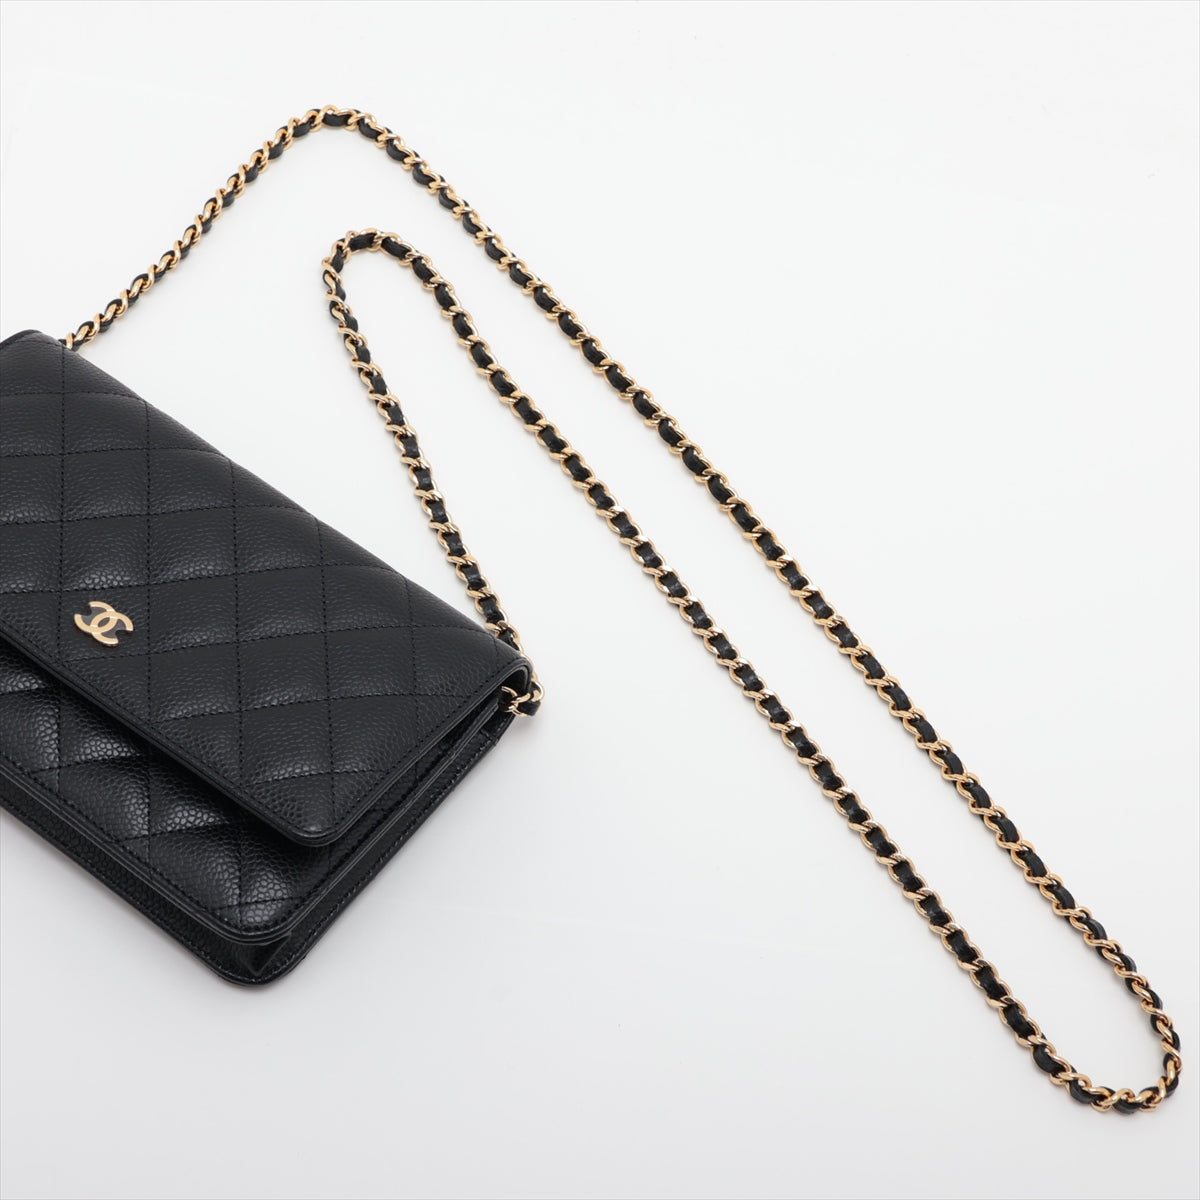 Chanel Matrasse Caviar S Chain Wallet Black G Gold  IC Chip A33814